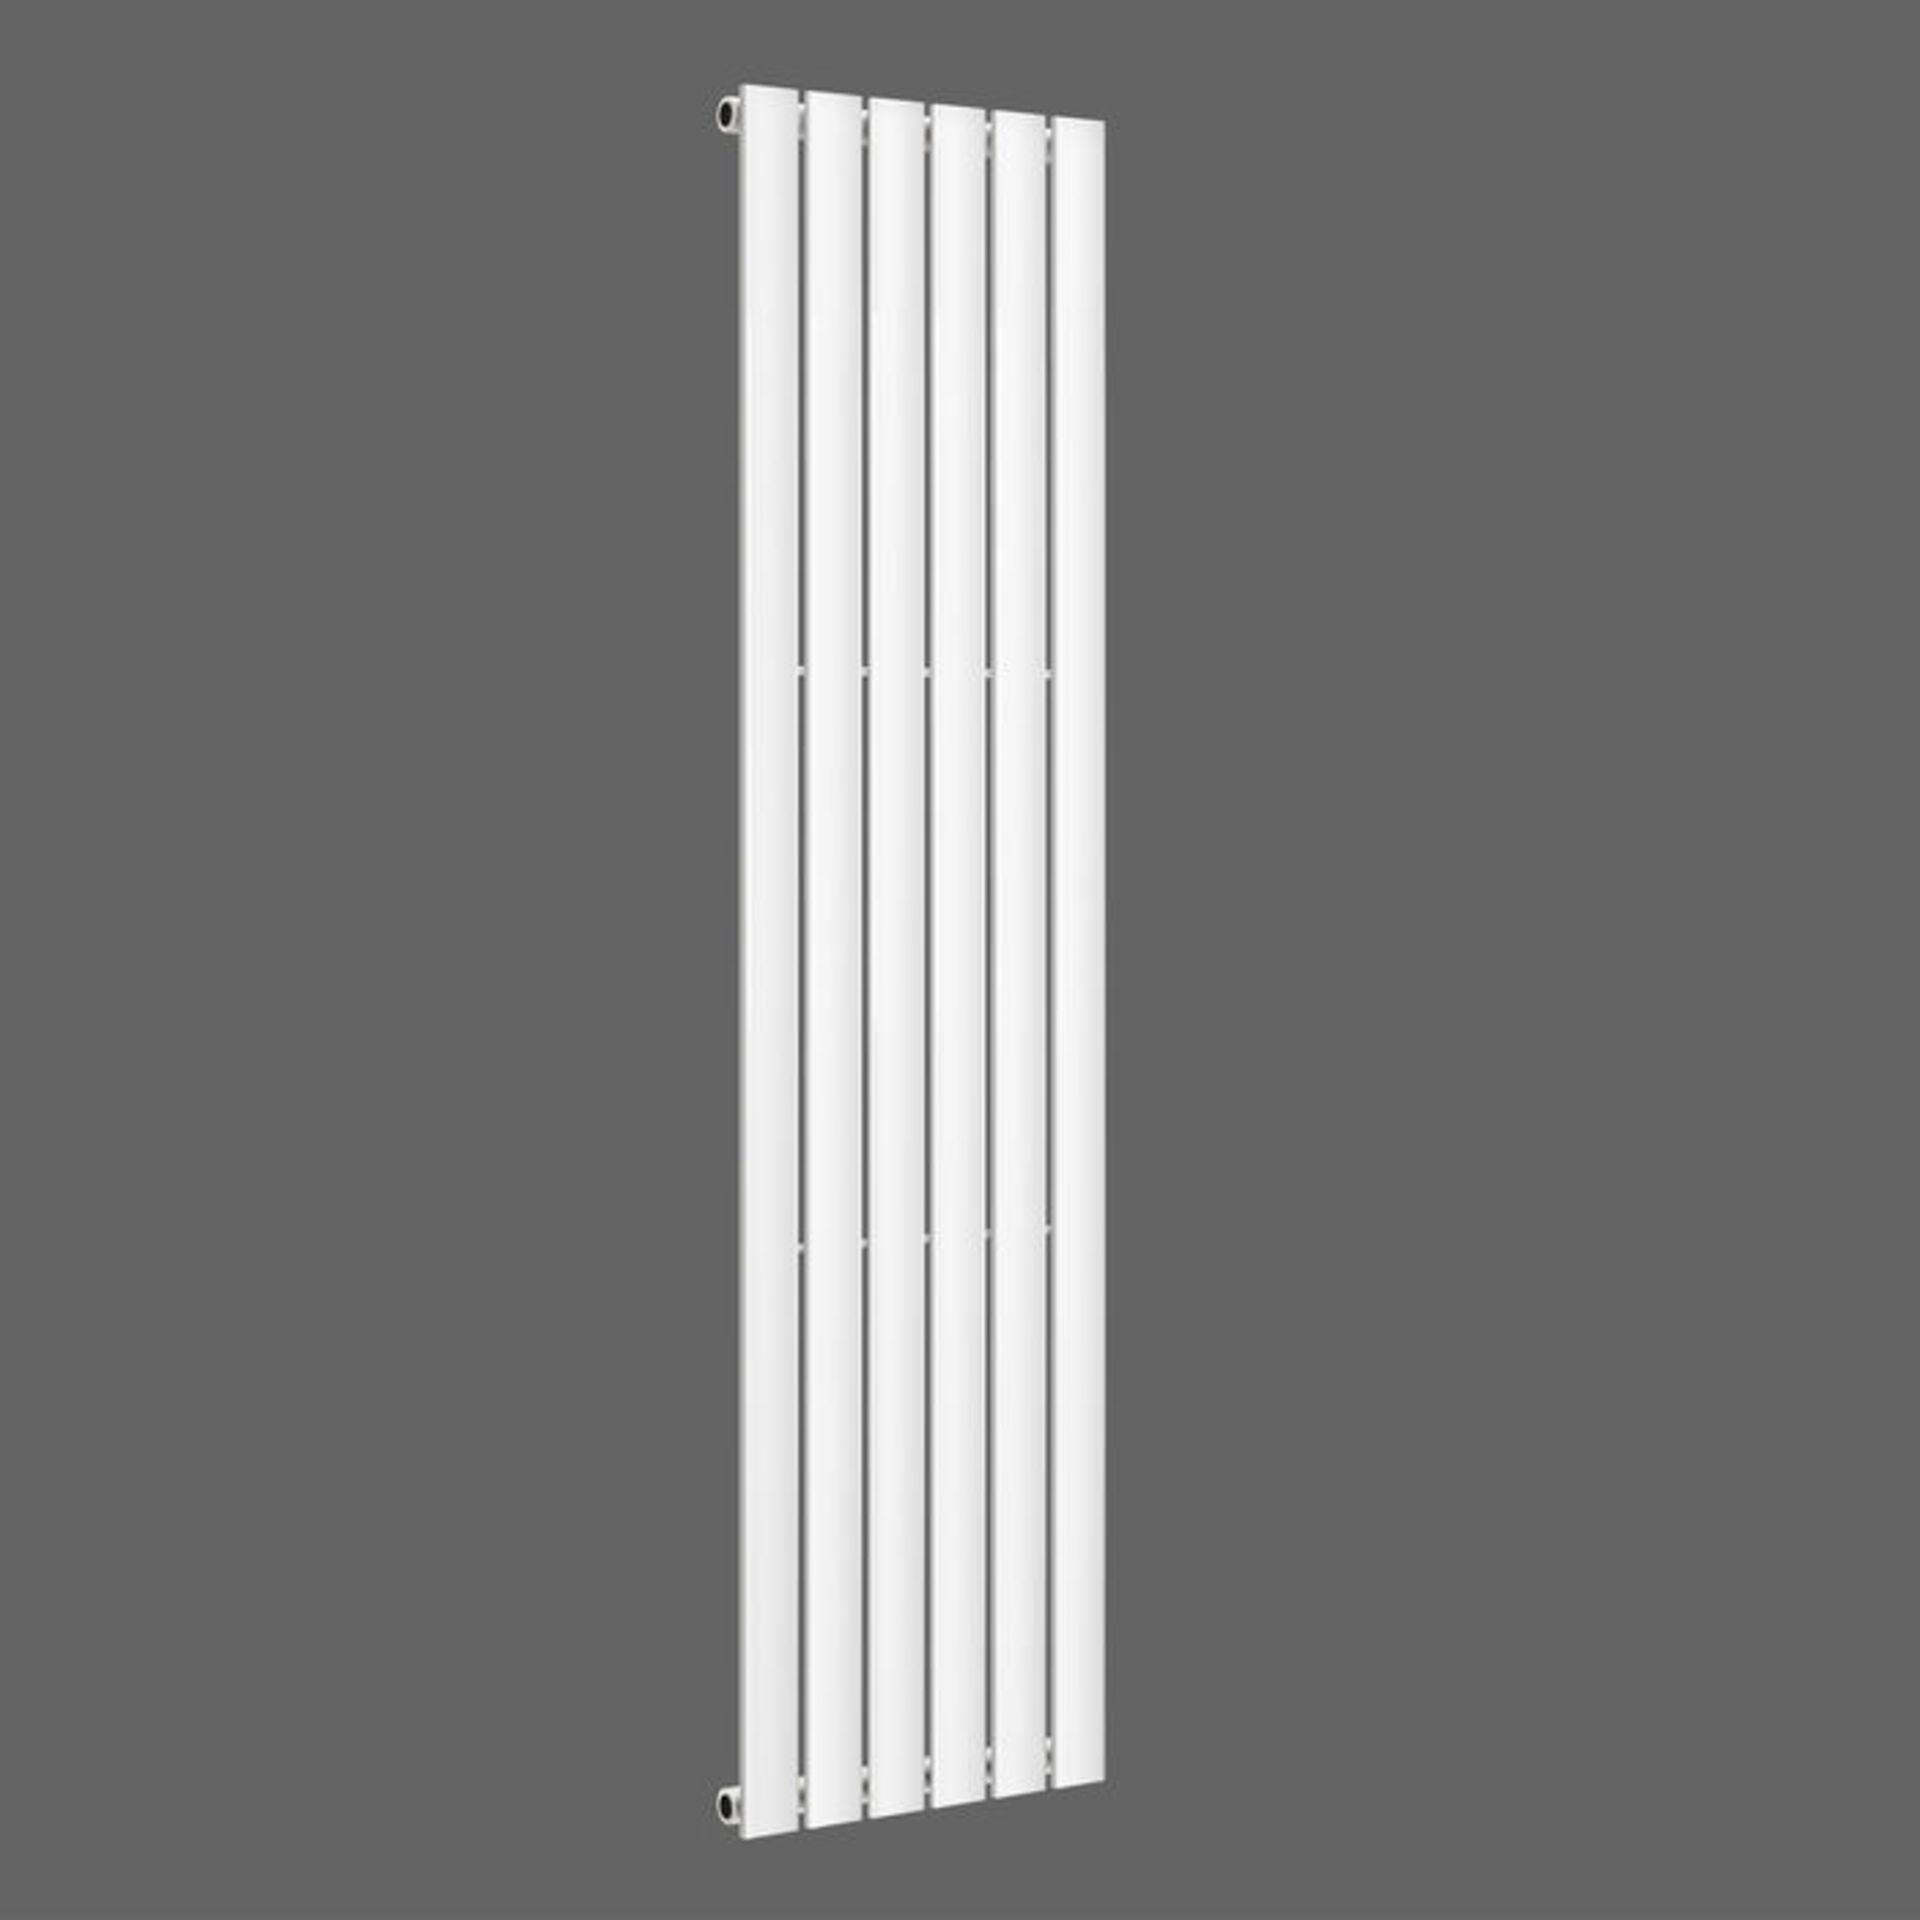 (AL9) 1800x452mm Gloss White Single Flat Panel Vertical Radiator. Made with low carbon steel Anti- - Image 3 of 3